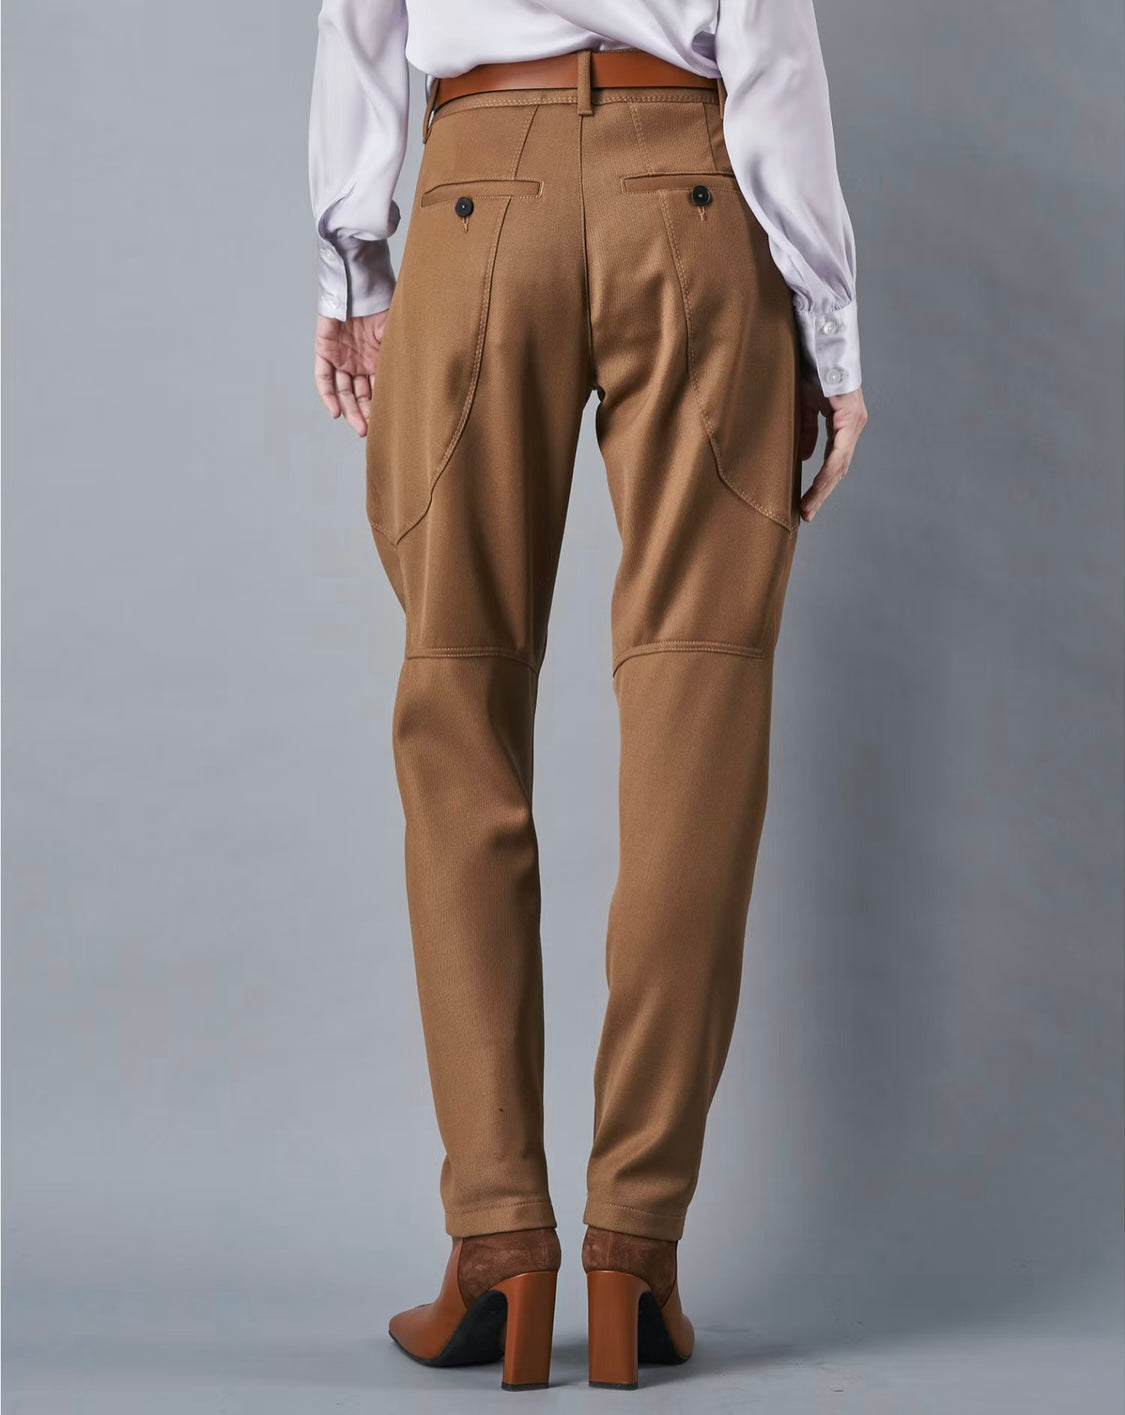 JJXX Wide & Flare Pants for Women sale - discounted price | FASHIOLA INDIA